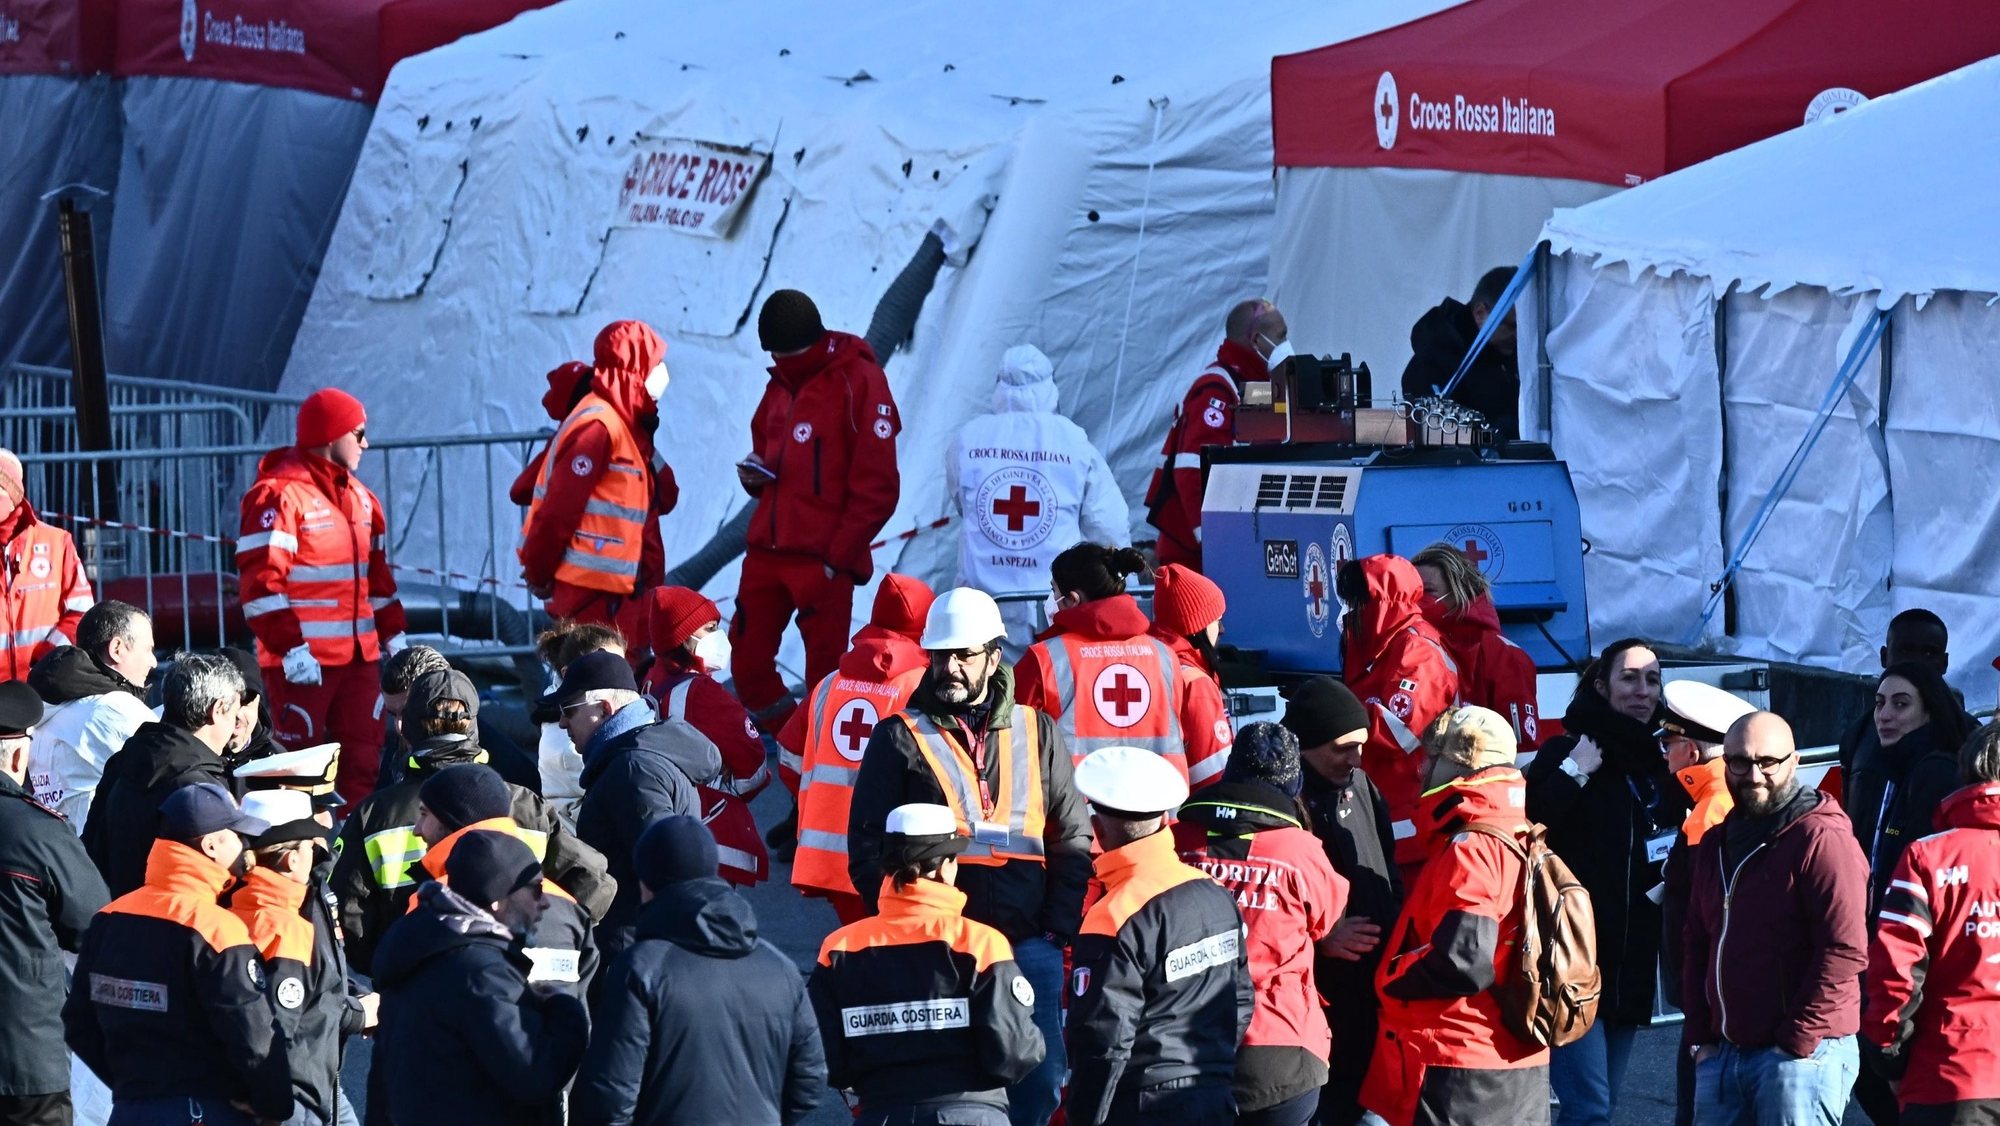 epa10436246 Health officers board the Geo Barents ship of the MSF after it docked at the port of La Spezia with with 37 migrants onboard, La Spezia, Italy, 28 January 2023. Doctors Without Frontiers (MSF) said on 25 January that the Geo Barents conducted its third rescue of the last few days and has 237 asylum seekers on board, adding that 107 people, including 36 minors and five women, were picked up from an overloaded dinghy in the latest operation.  EPA/LUCA ZENNARO